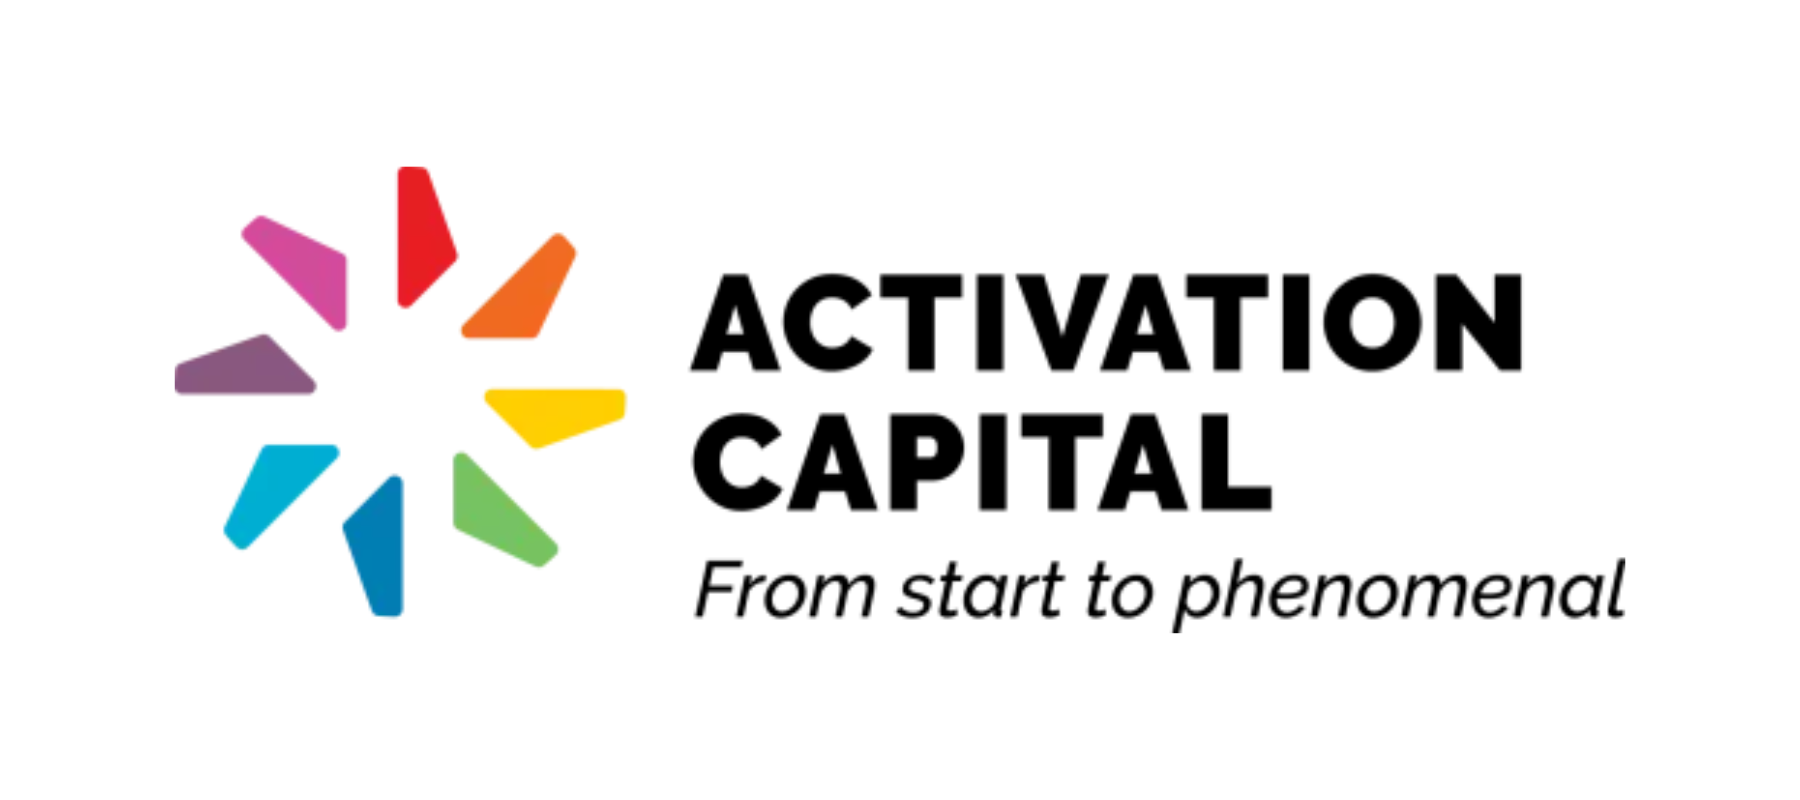 Activation Capital launches Frontier BioHealth program to catalyze life science startups